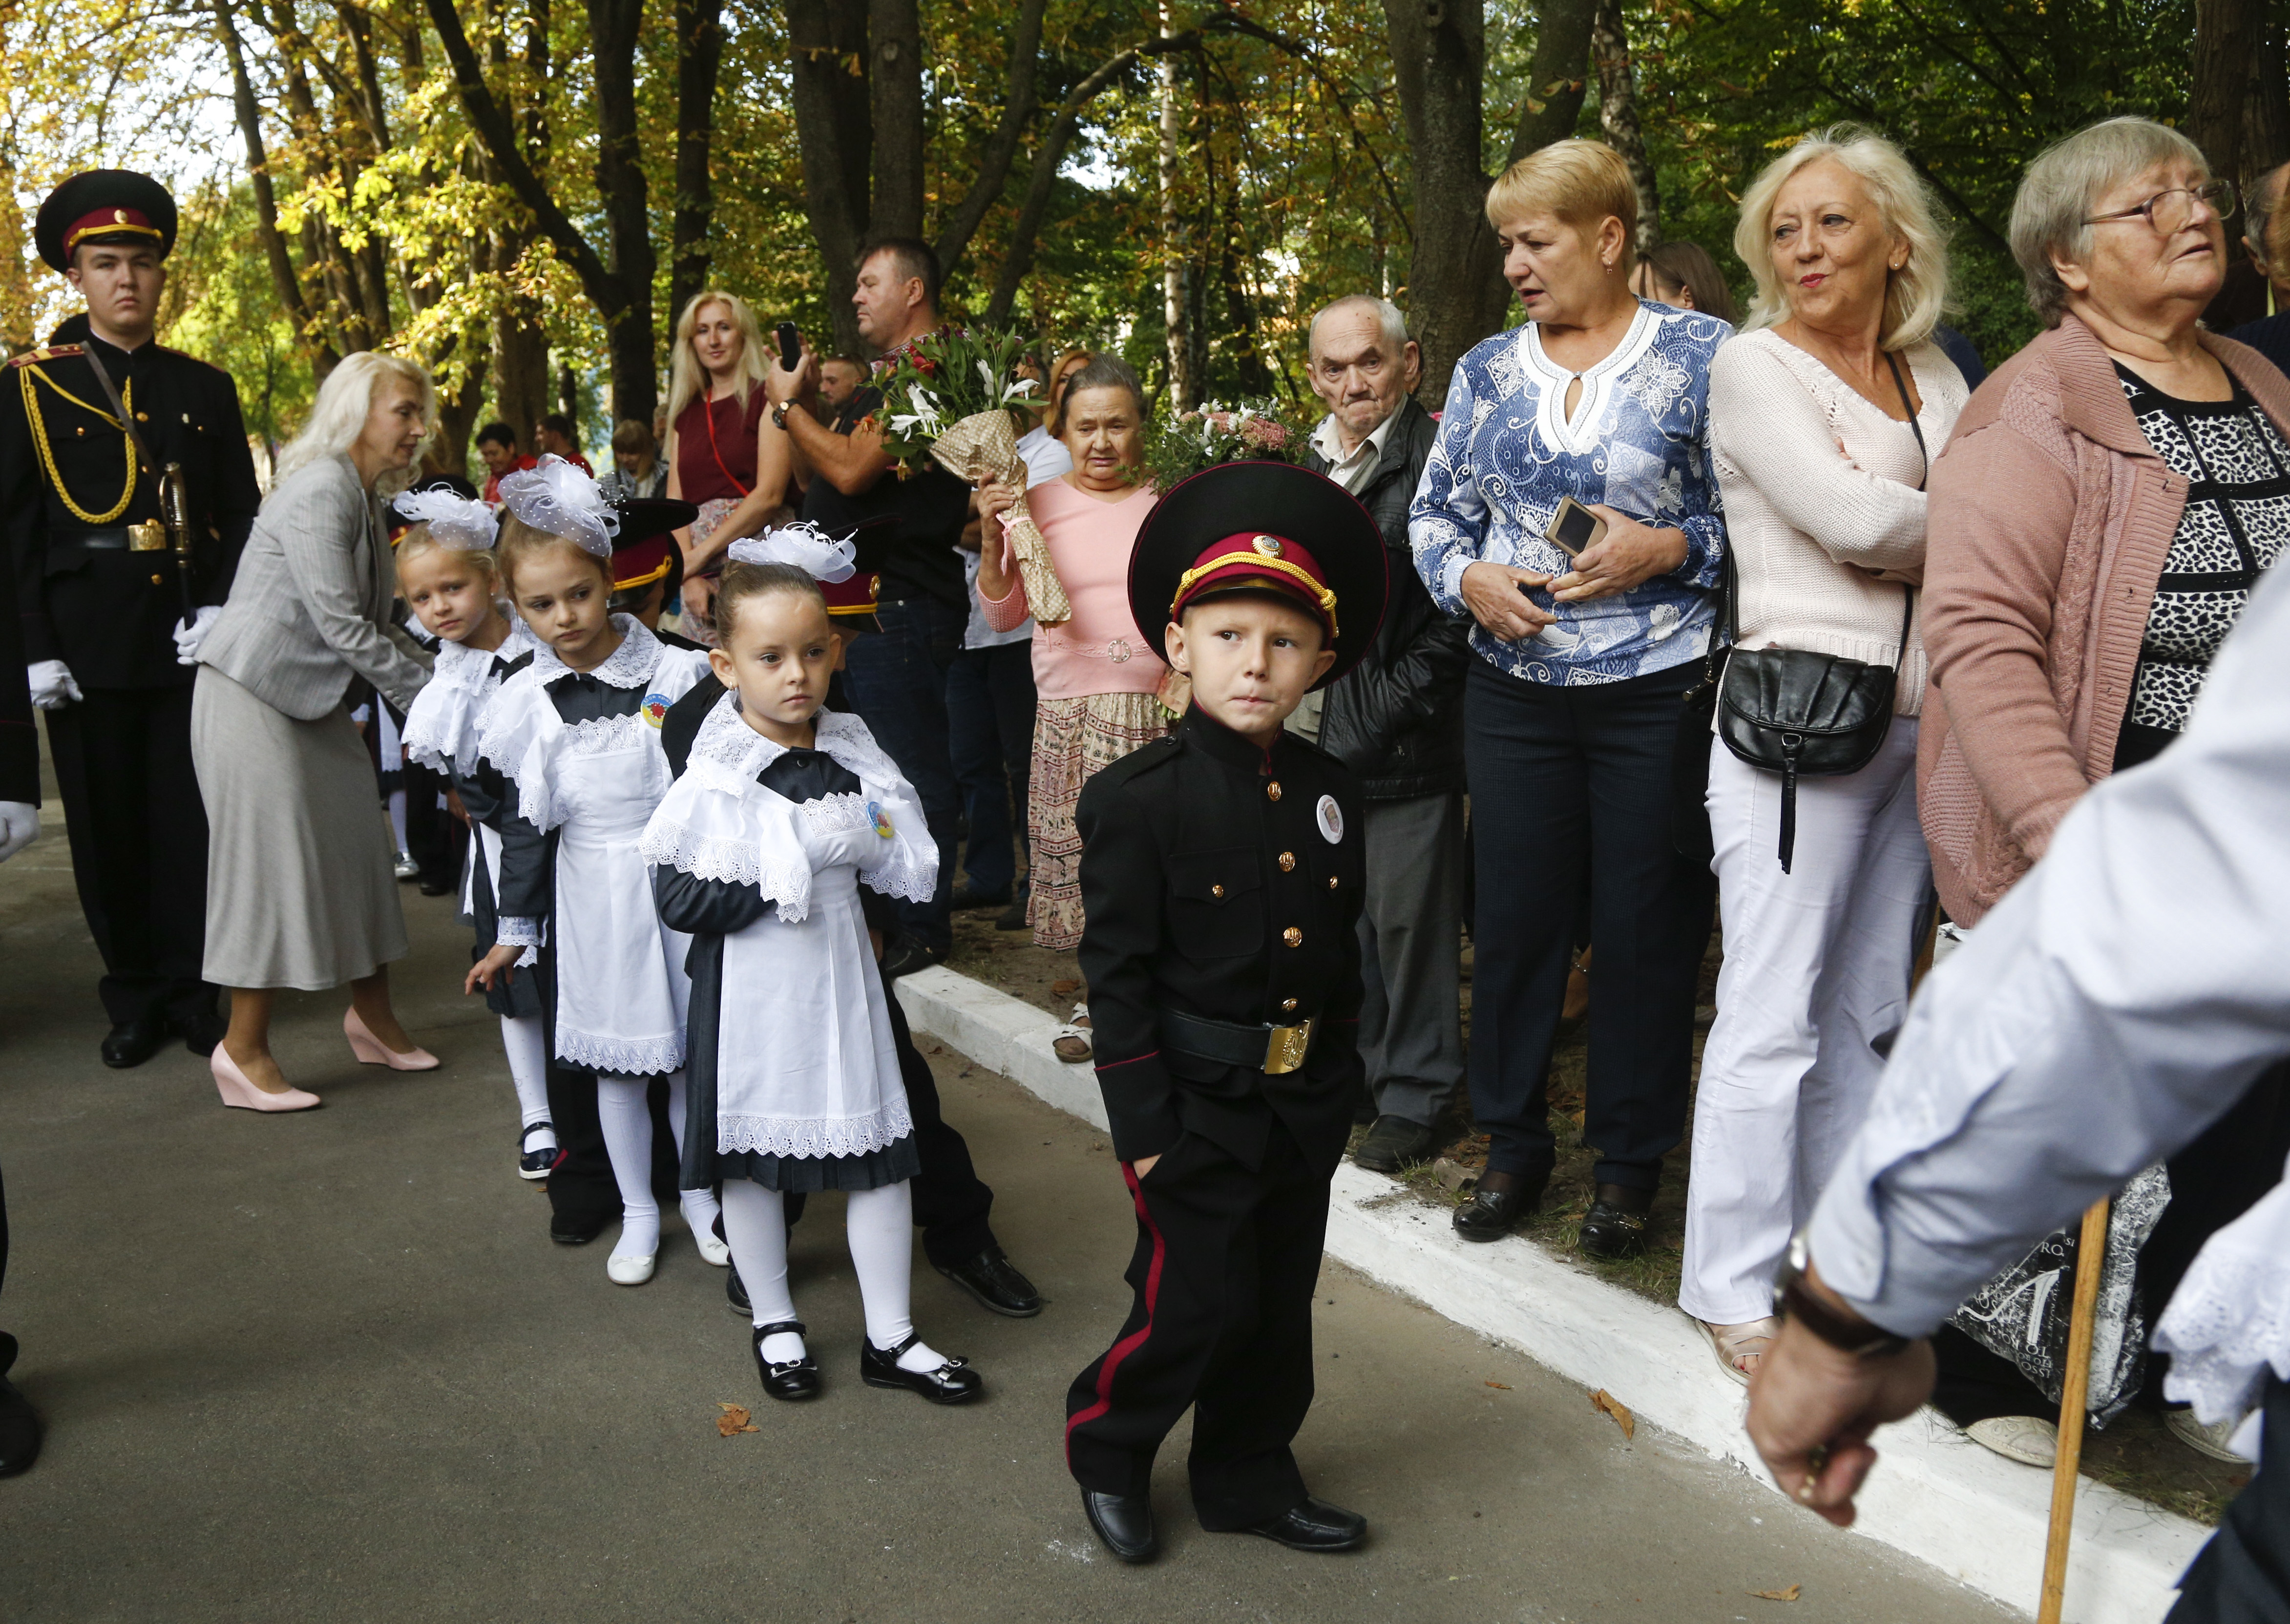 Relatives and schoolchildrens wait for a ceremony on the occasion of the first day of school at a cadet lyceum in Kiev, Ukraine, Friday, Sept. 1, 2017. Ukraine marks Sept. 1 as Knowledge Day, as a traditional launch of the academic year. (AP Photo/Efrem Lukatsky)